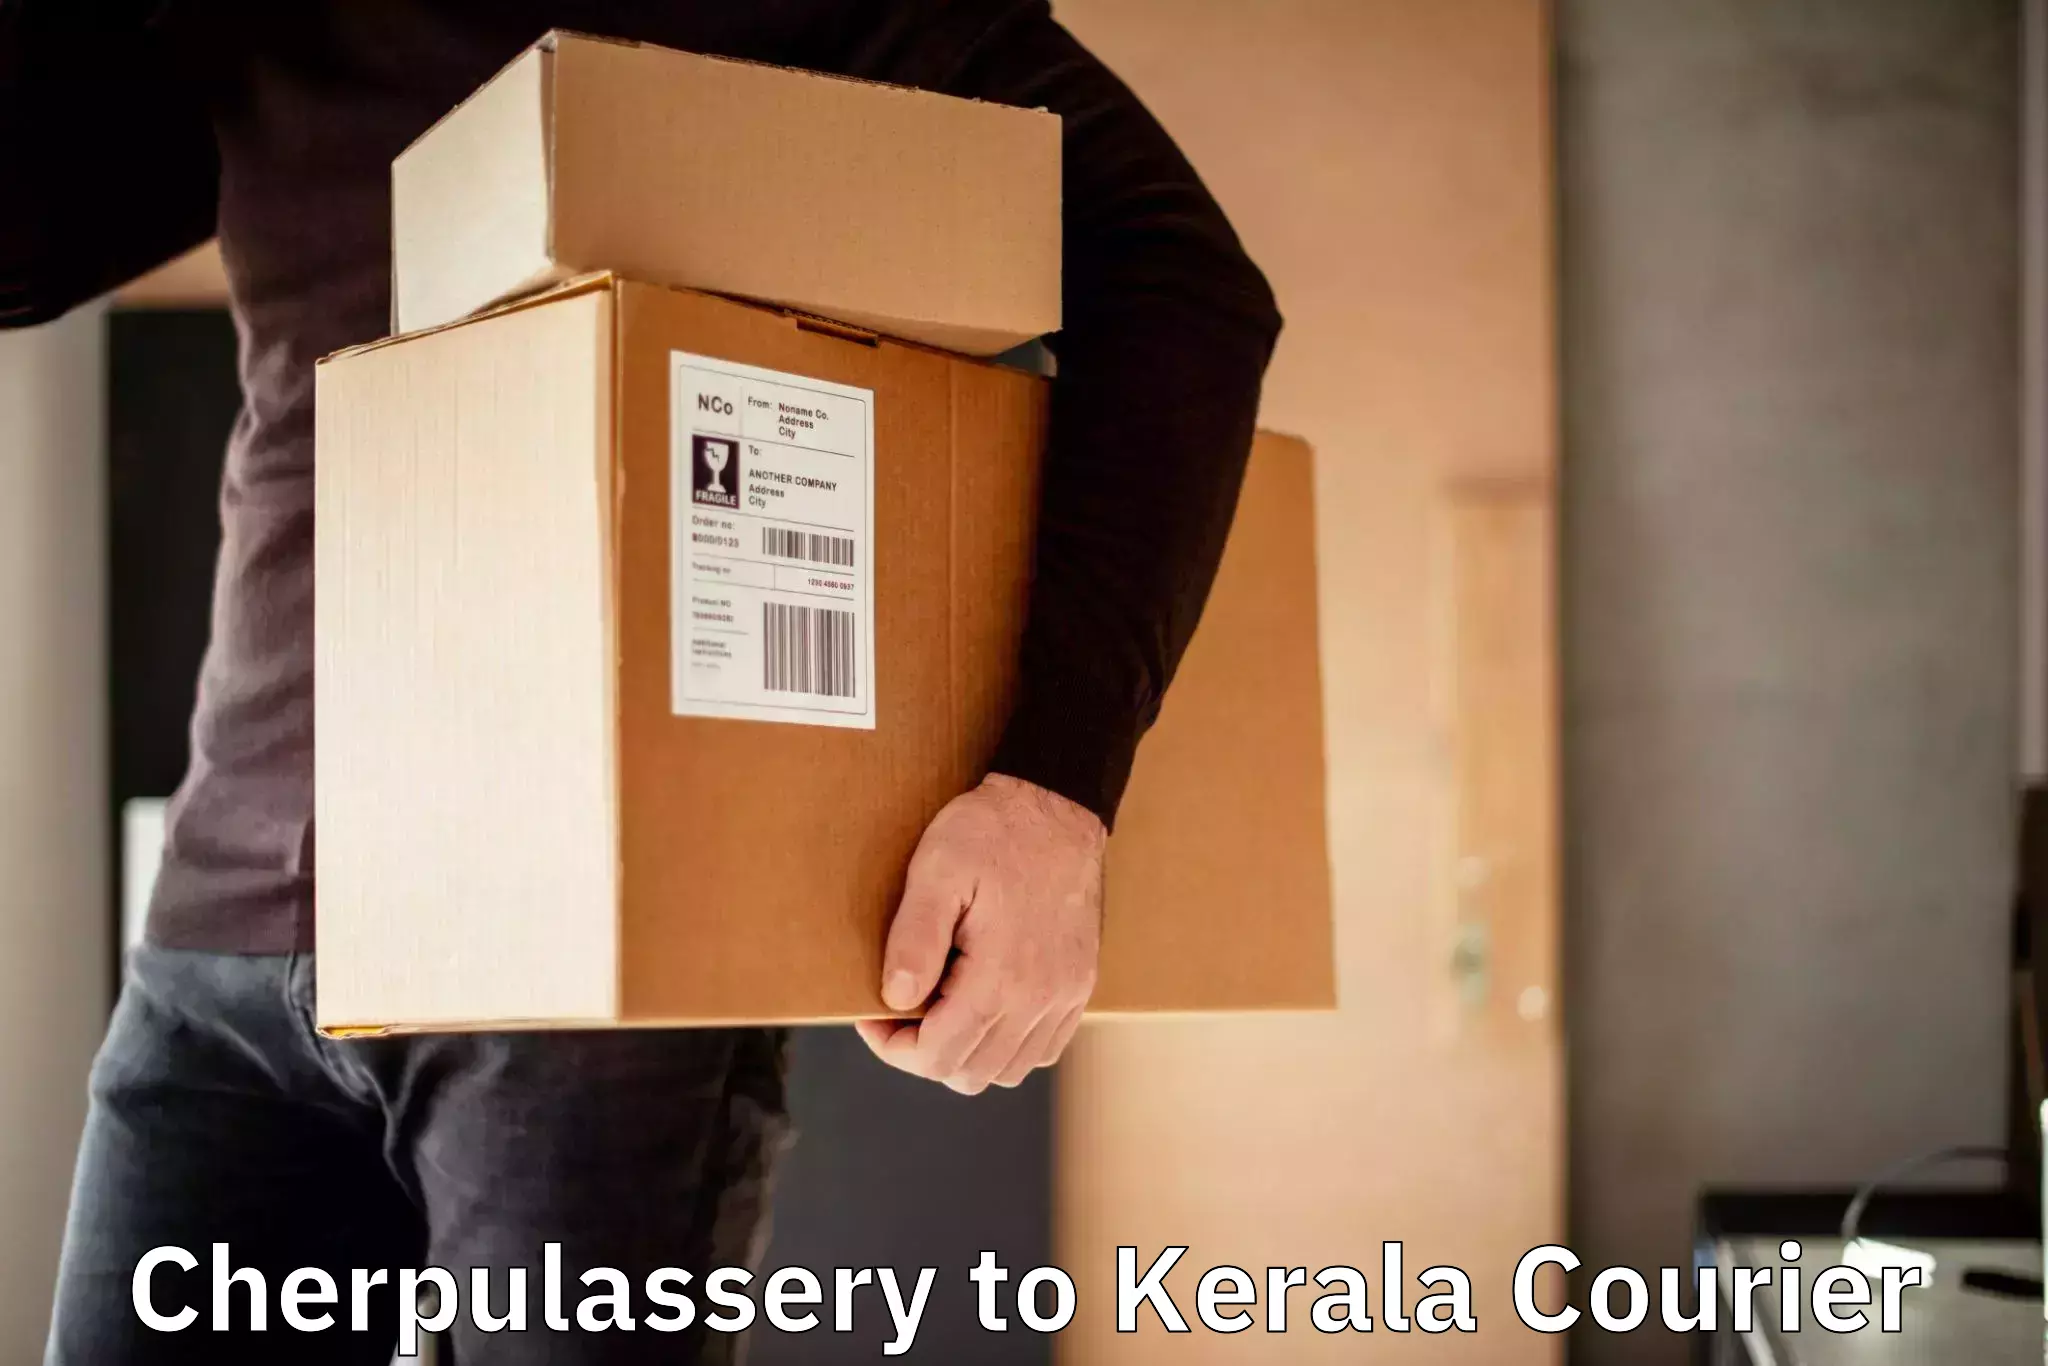 Courier service booking Cherpulassery to Cochin University of Science and Technology